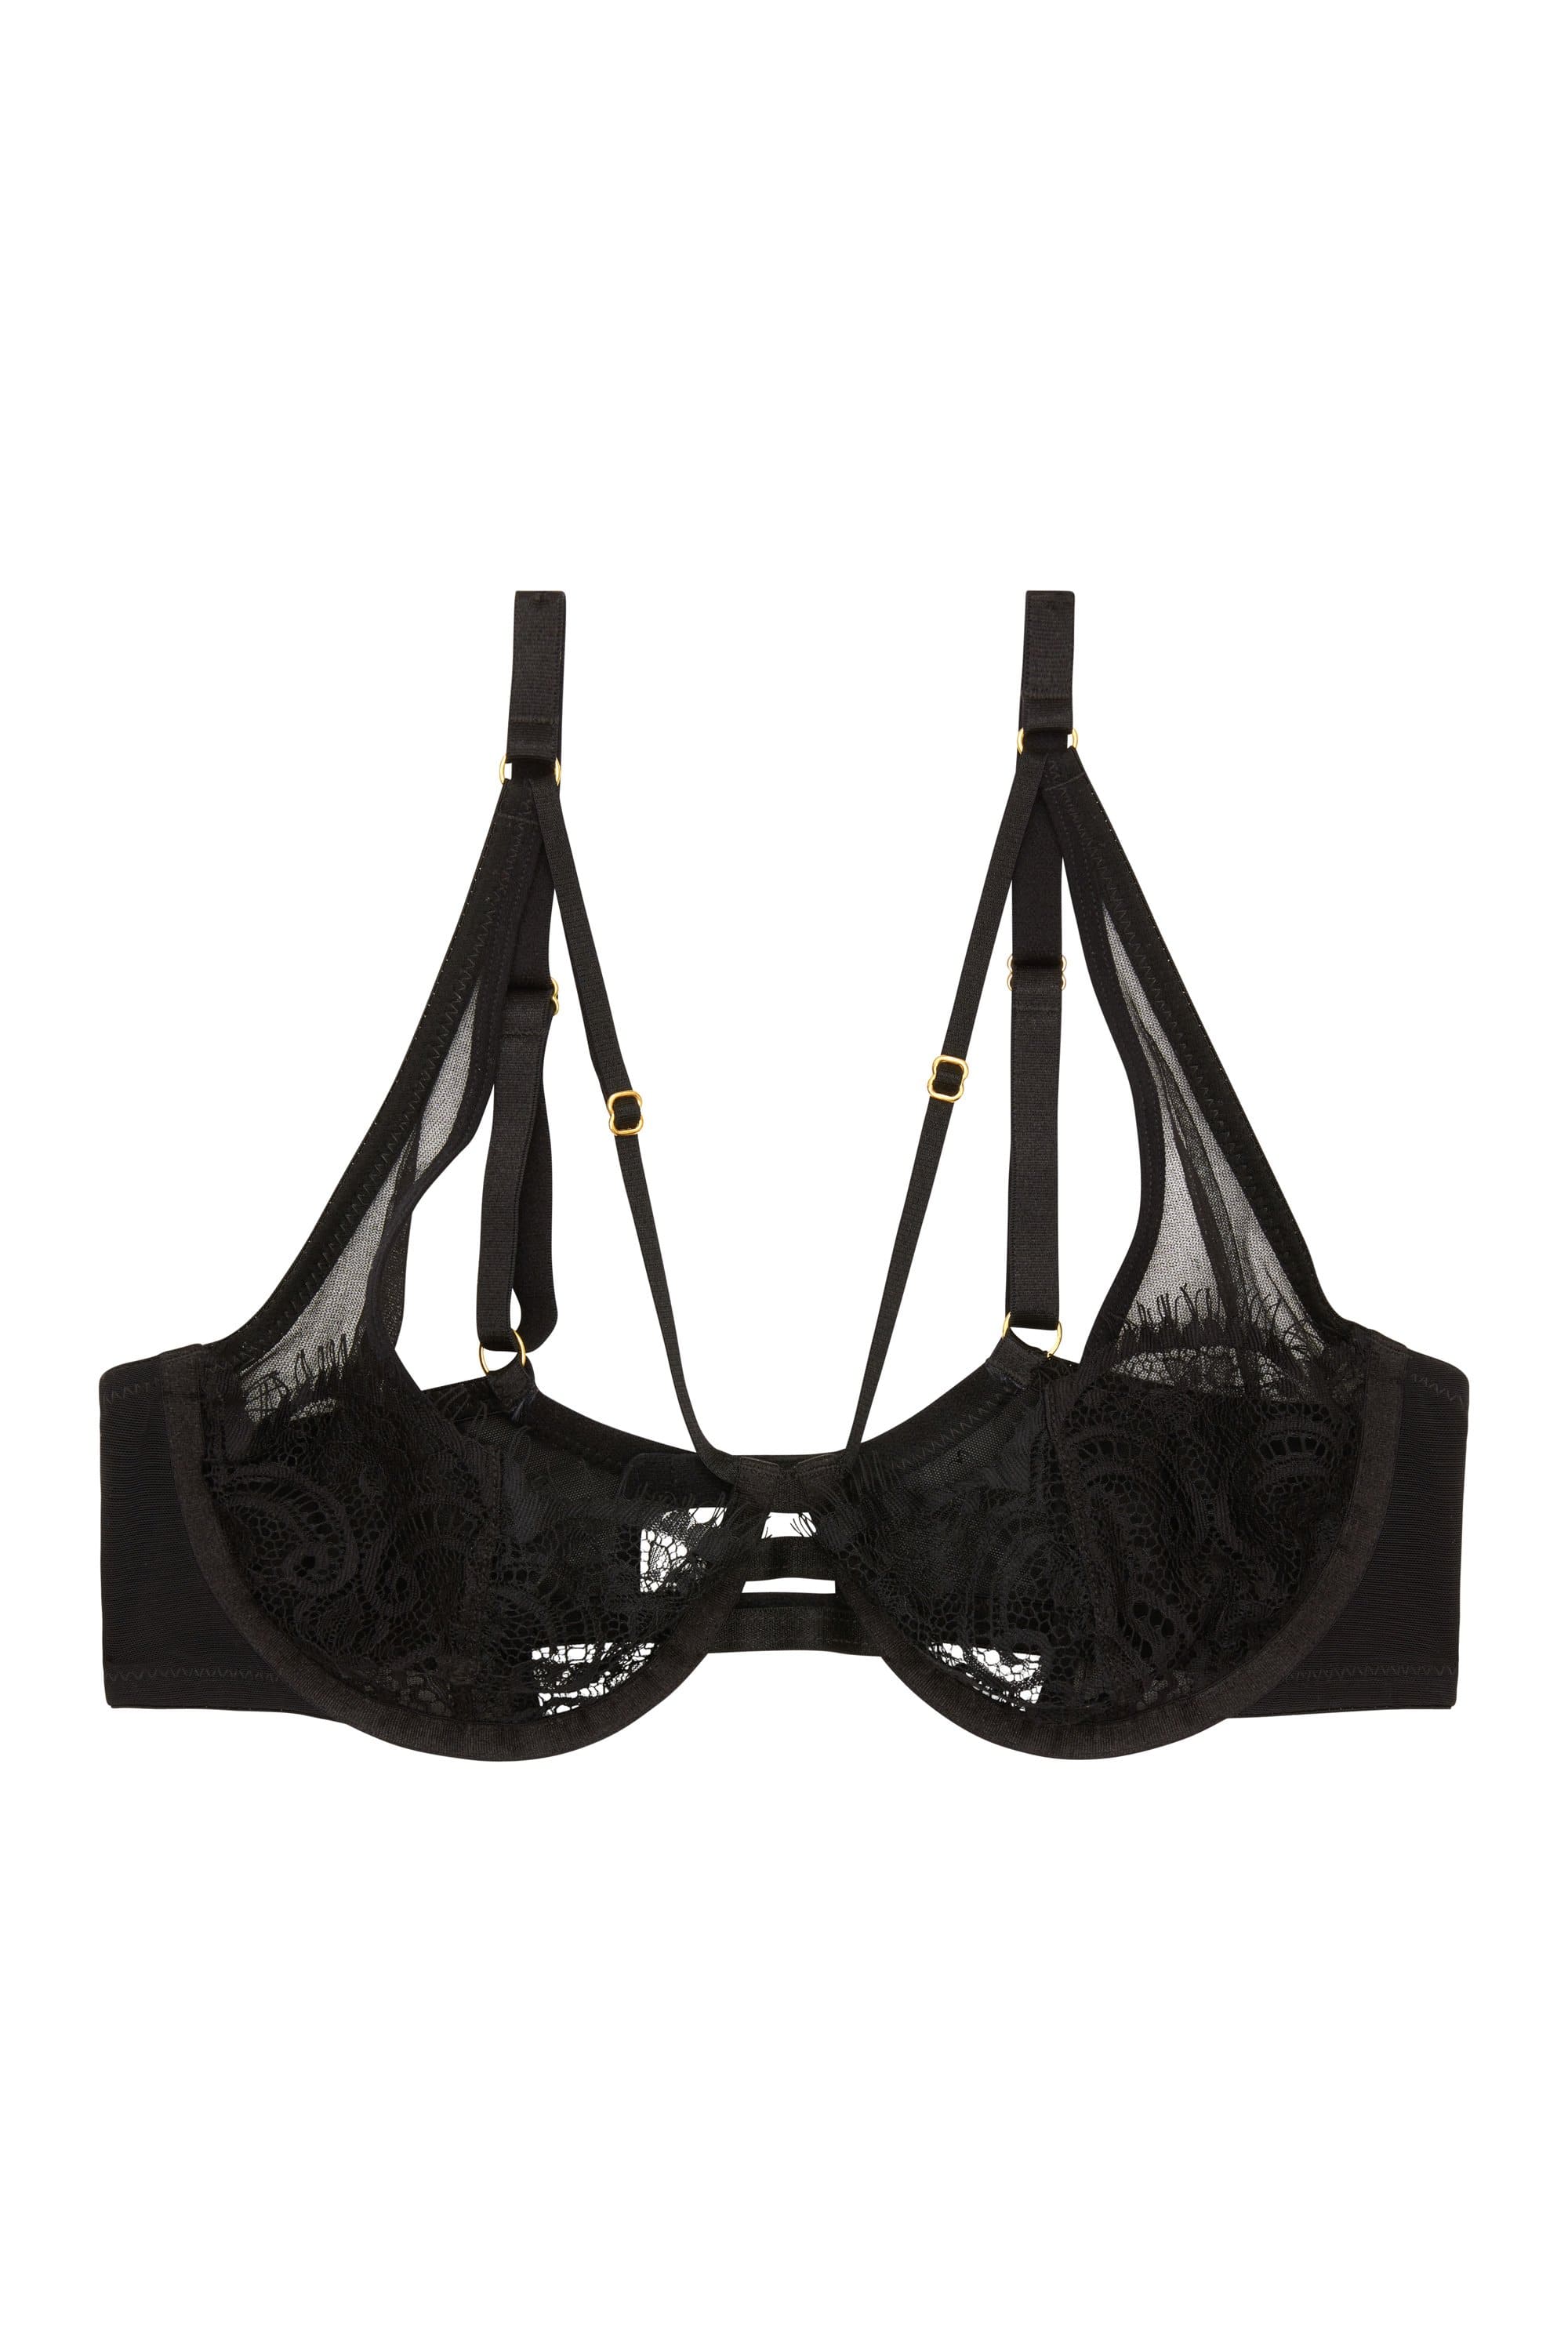 Wolf & Whistle Layla Lace Overlay High Apex Bra B - G